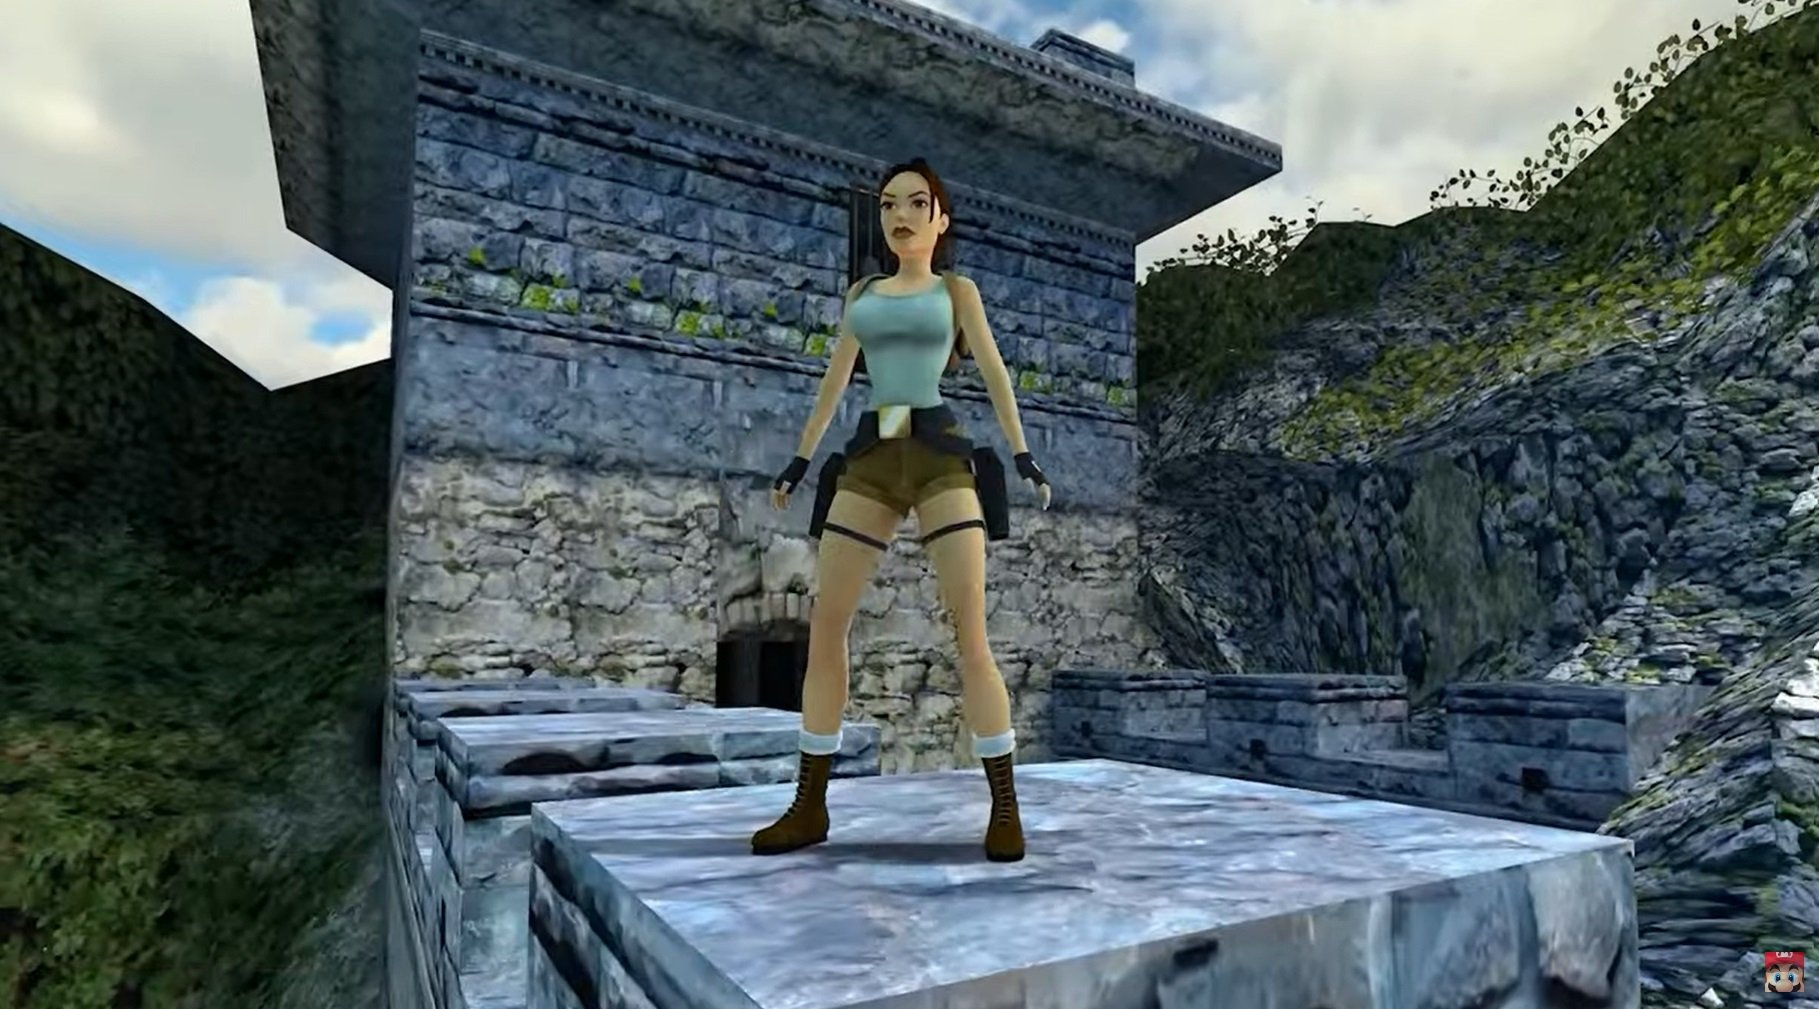 Tomb Raider Trilogy Remastered release date